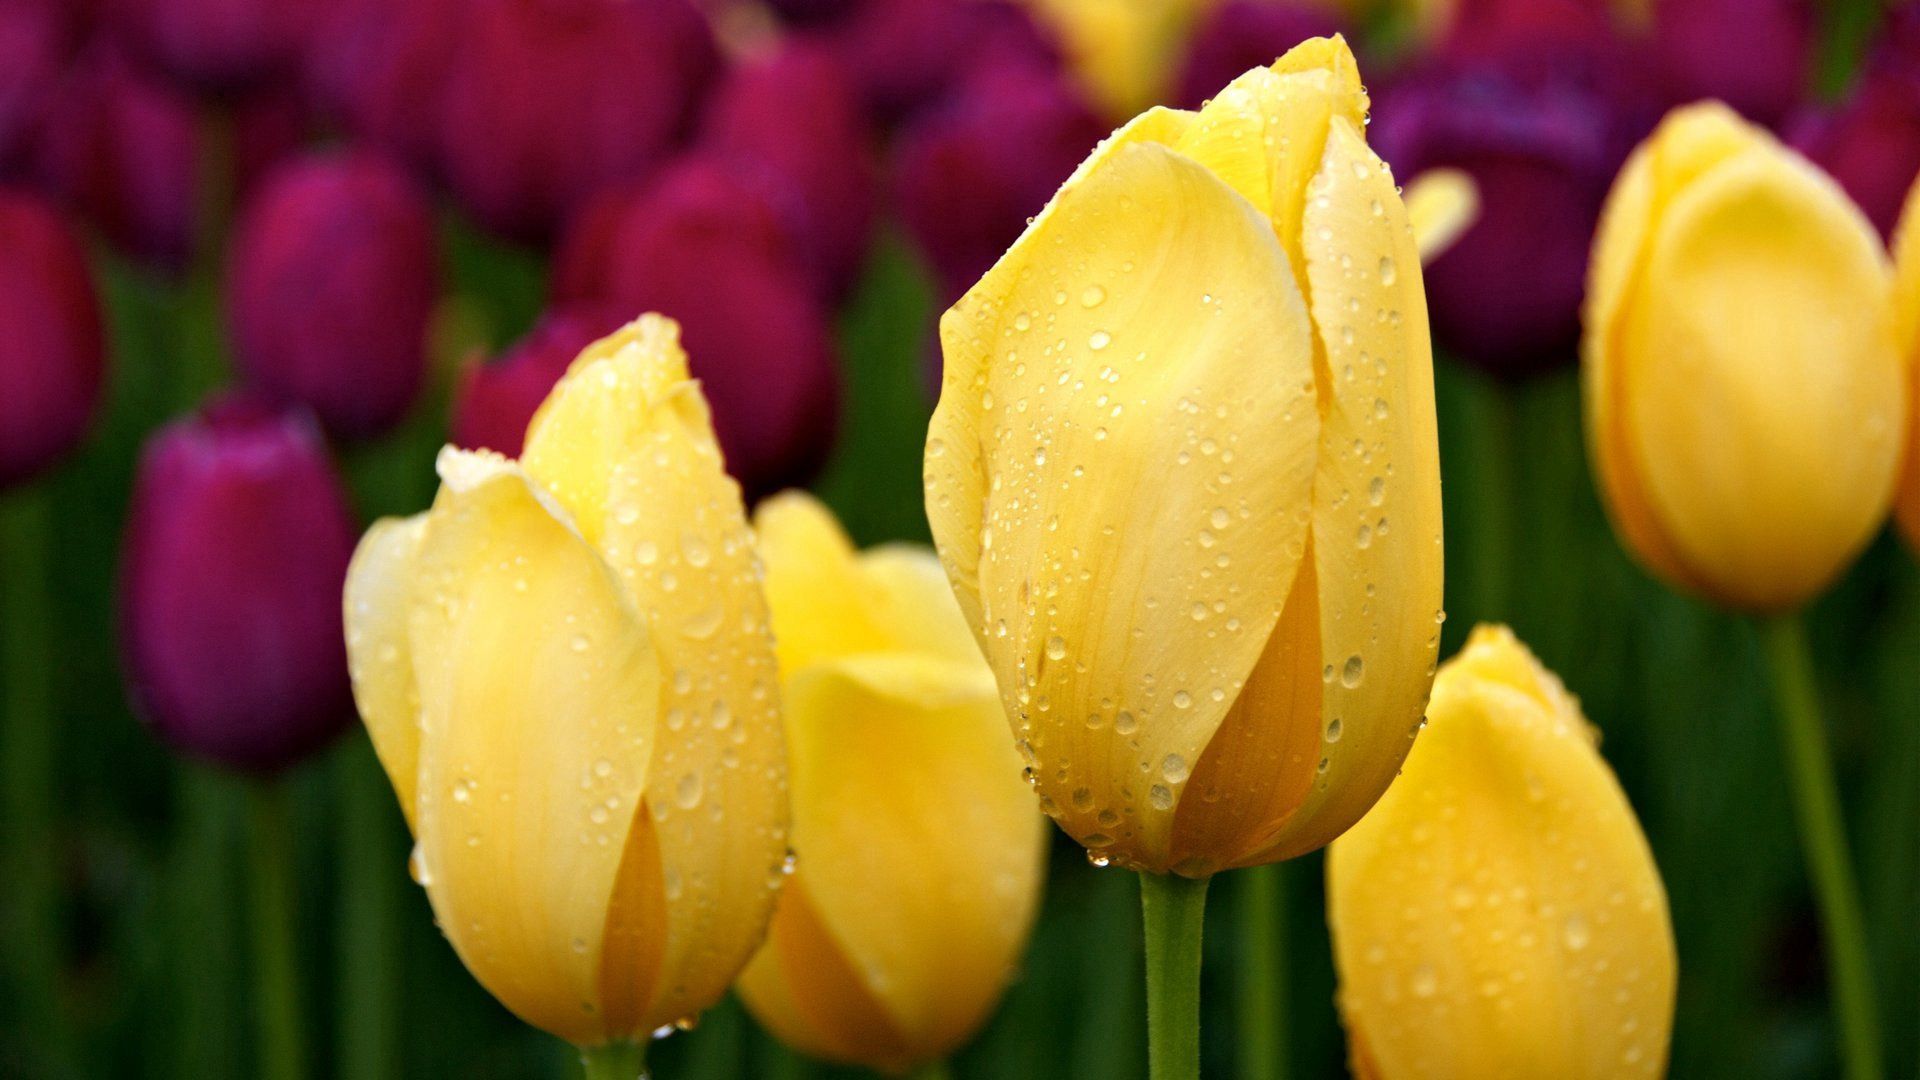 flowers, tulips, drops, greens, buds, different iphone wallpaper